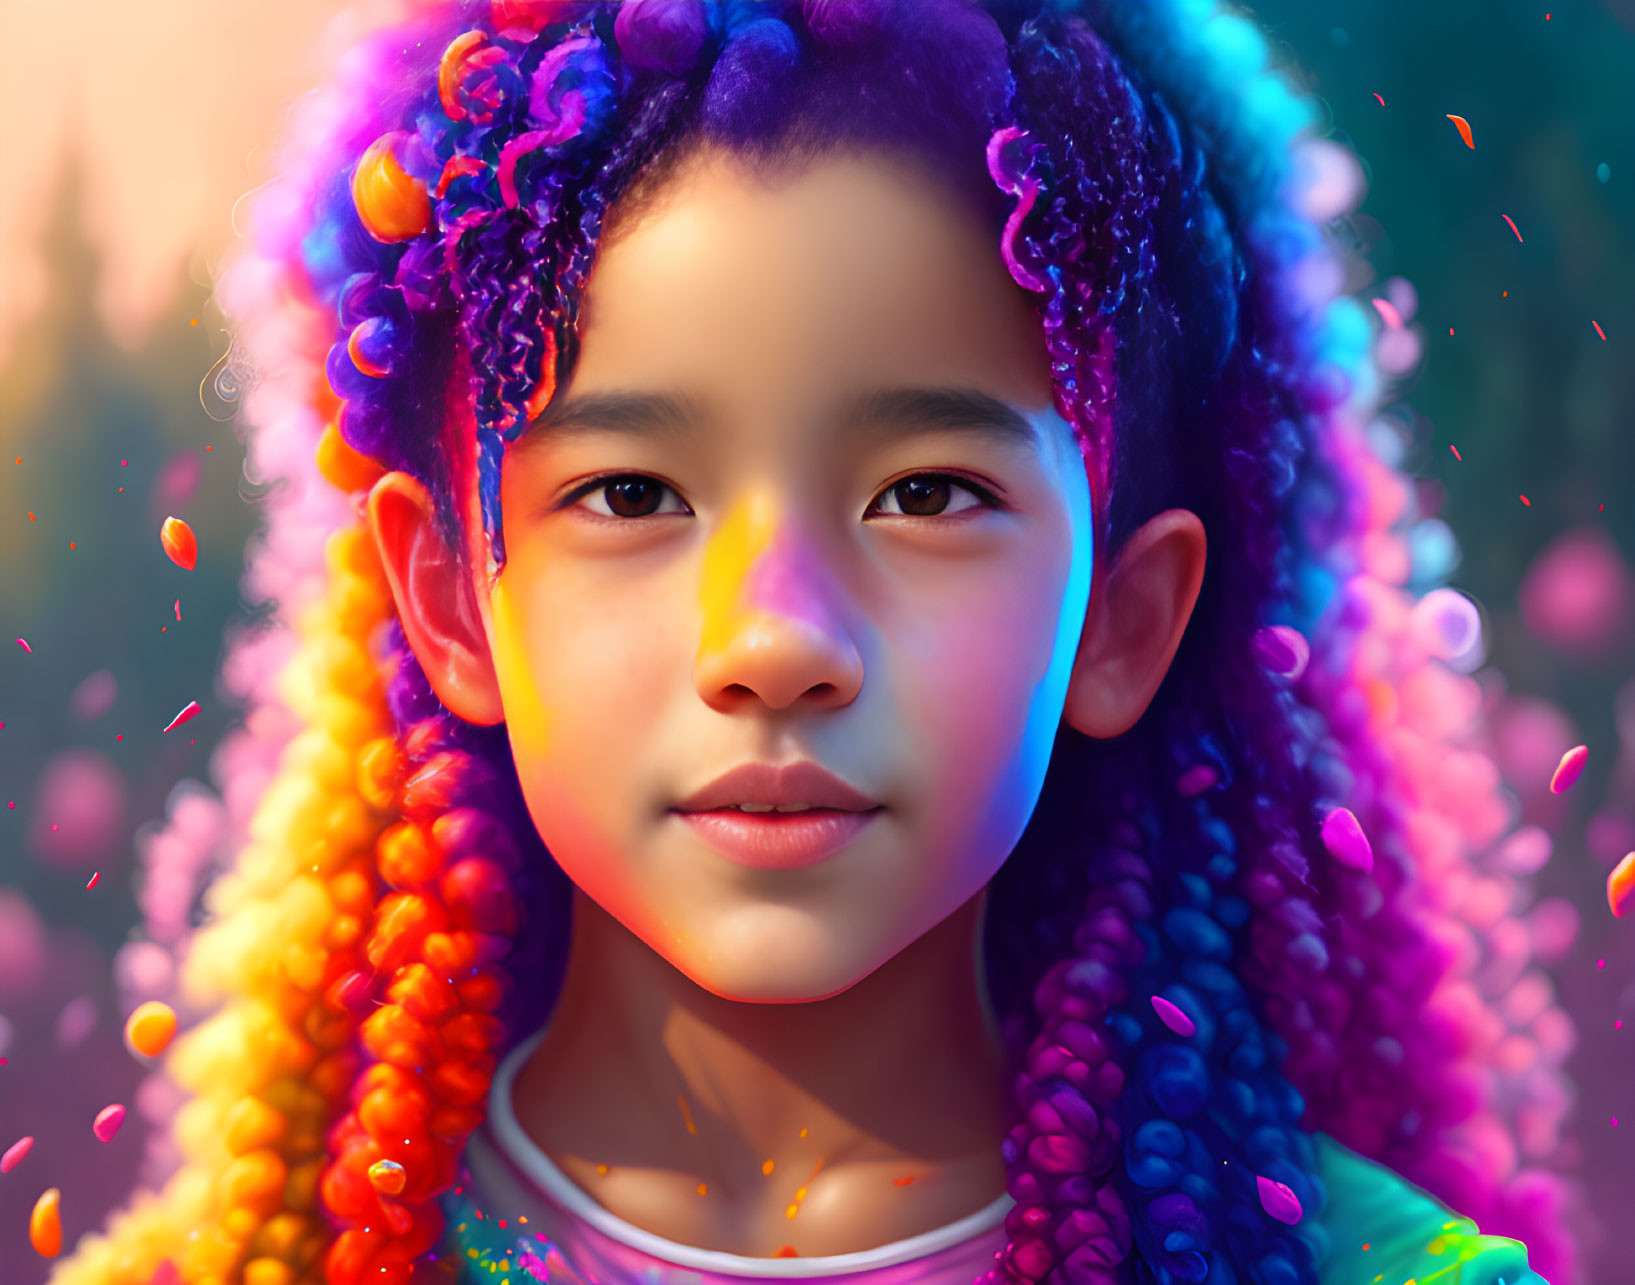 Colorful Portrait of Child with Rainbow Curly Hair